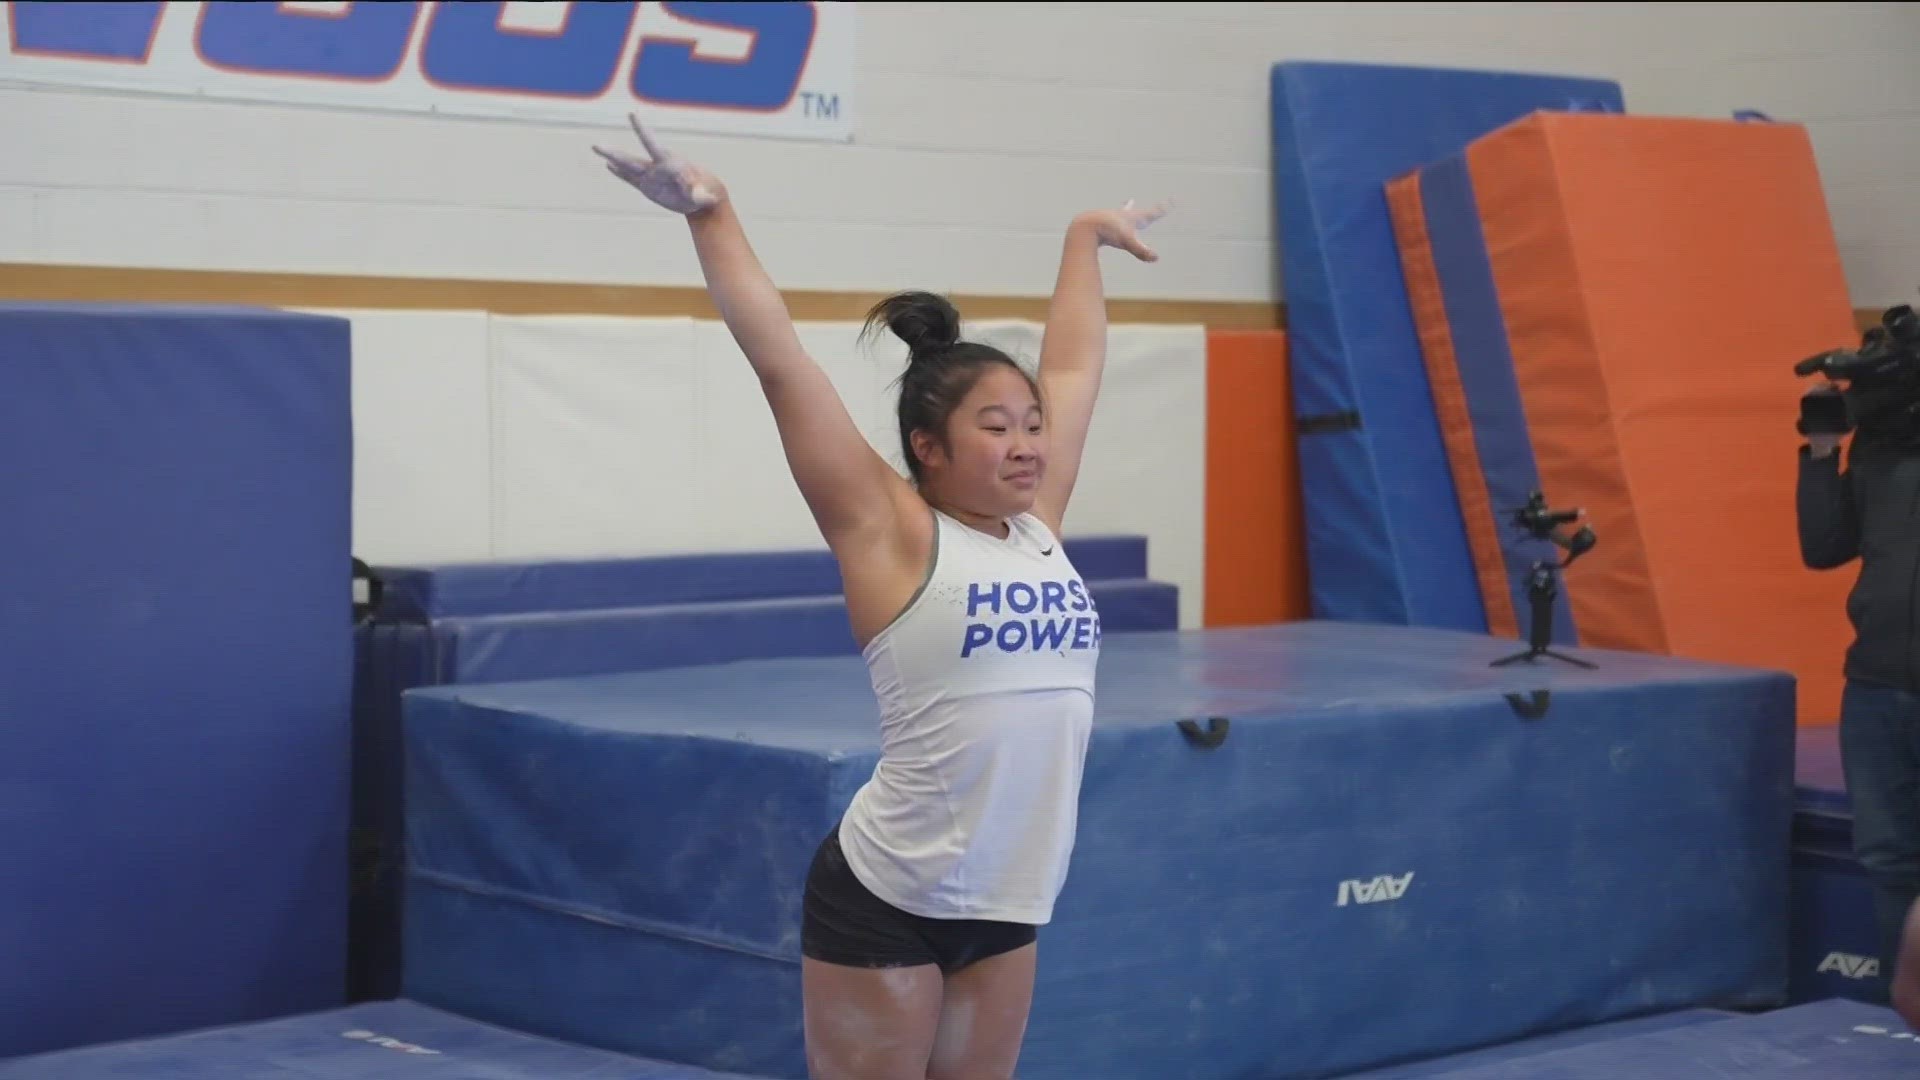 Boise State women's gymnastics will compete in the Mountain West Conference in 2023. The Broncos previously competed in the Mountain Rim Gymnastics Conference.